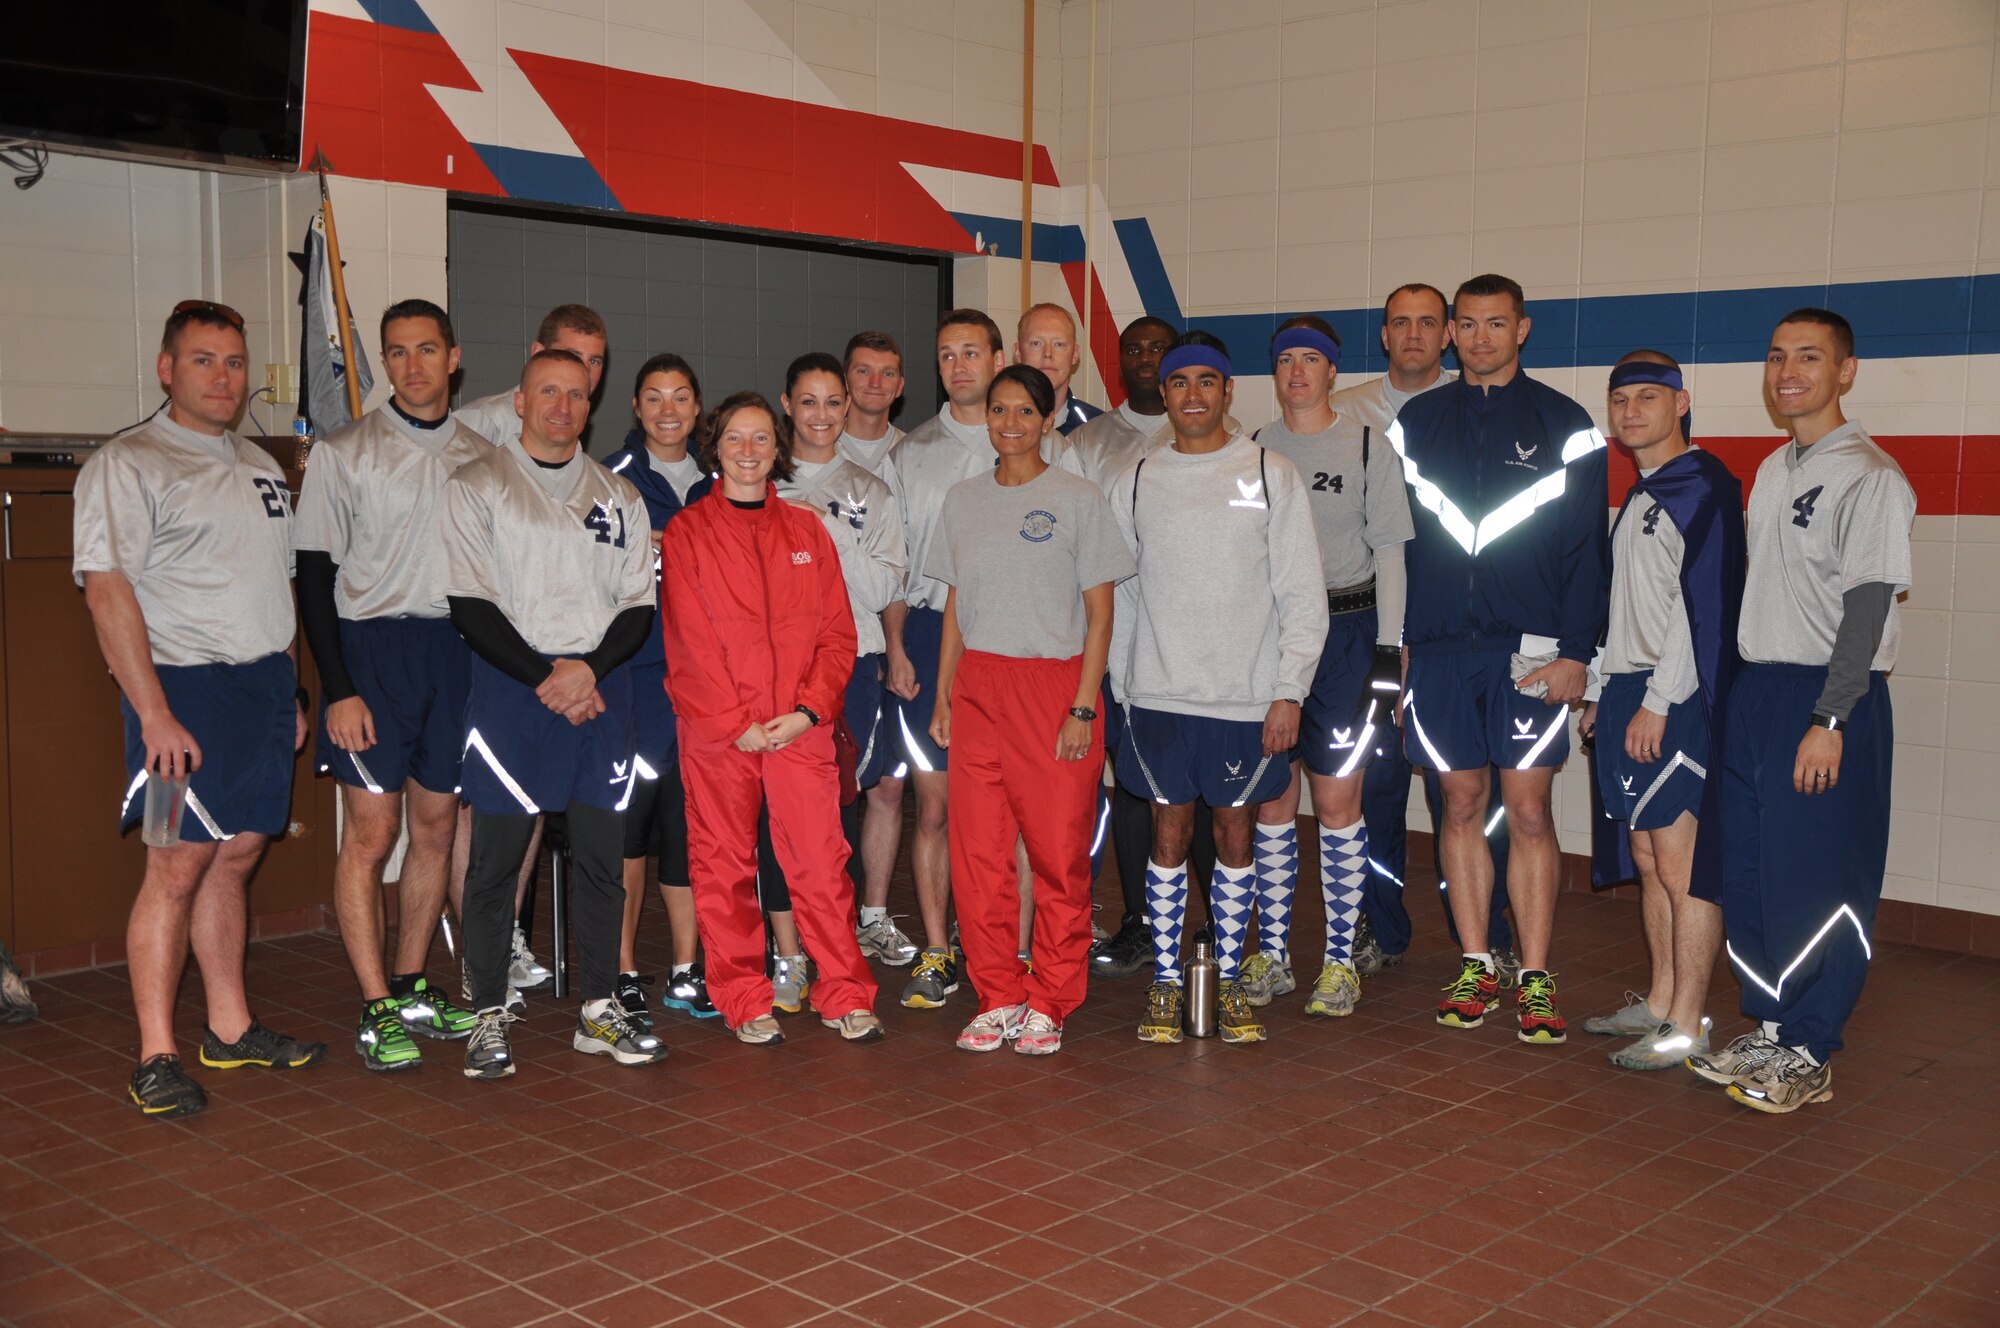 Squadron Officer School runners prepare for the Mercedes Marathon in Birmingham Feb. 10-12. Taking time out for fitness has promoted camaraderie among the Airmen. (Courtesy photo)